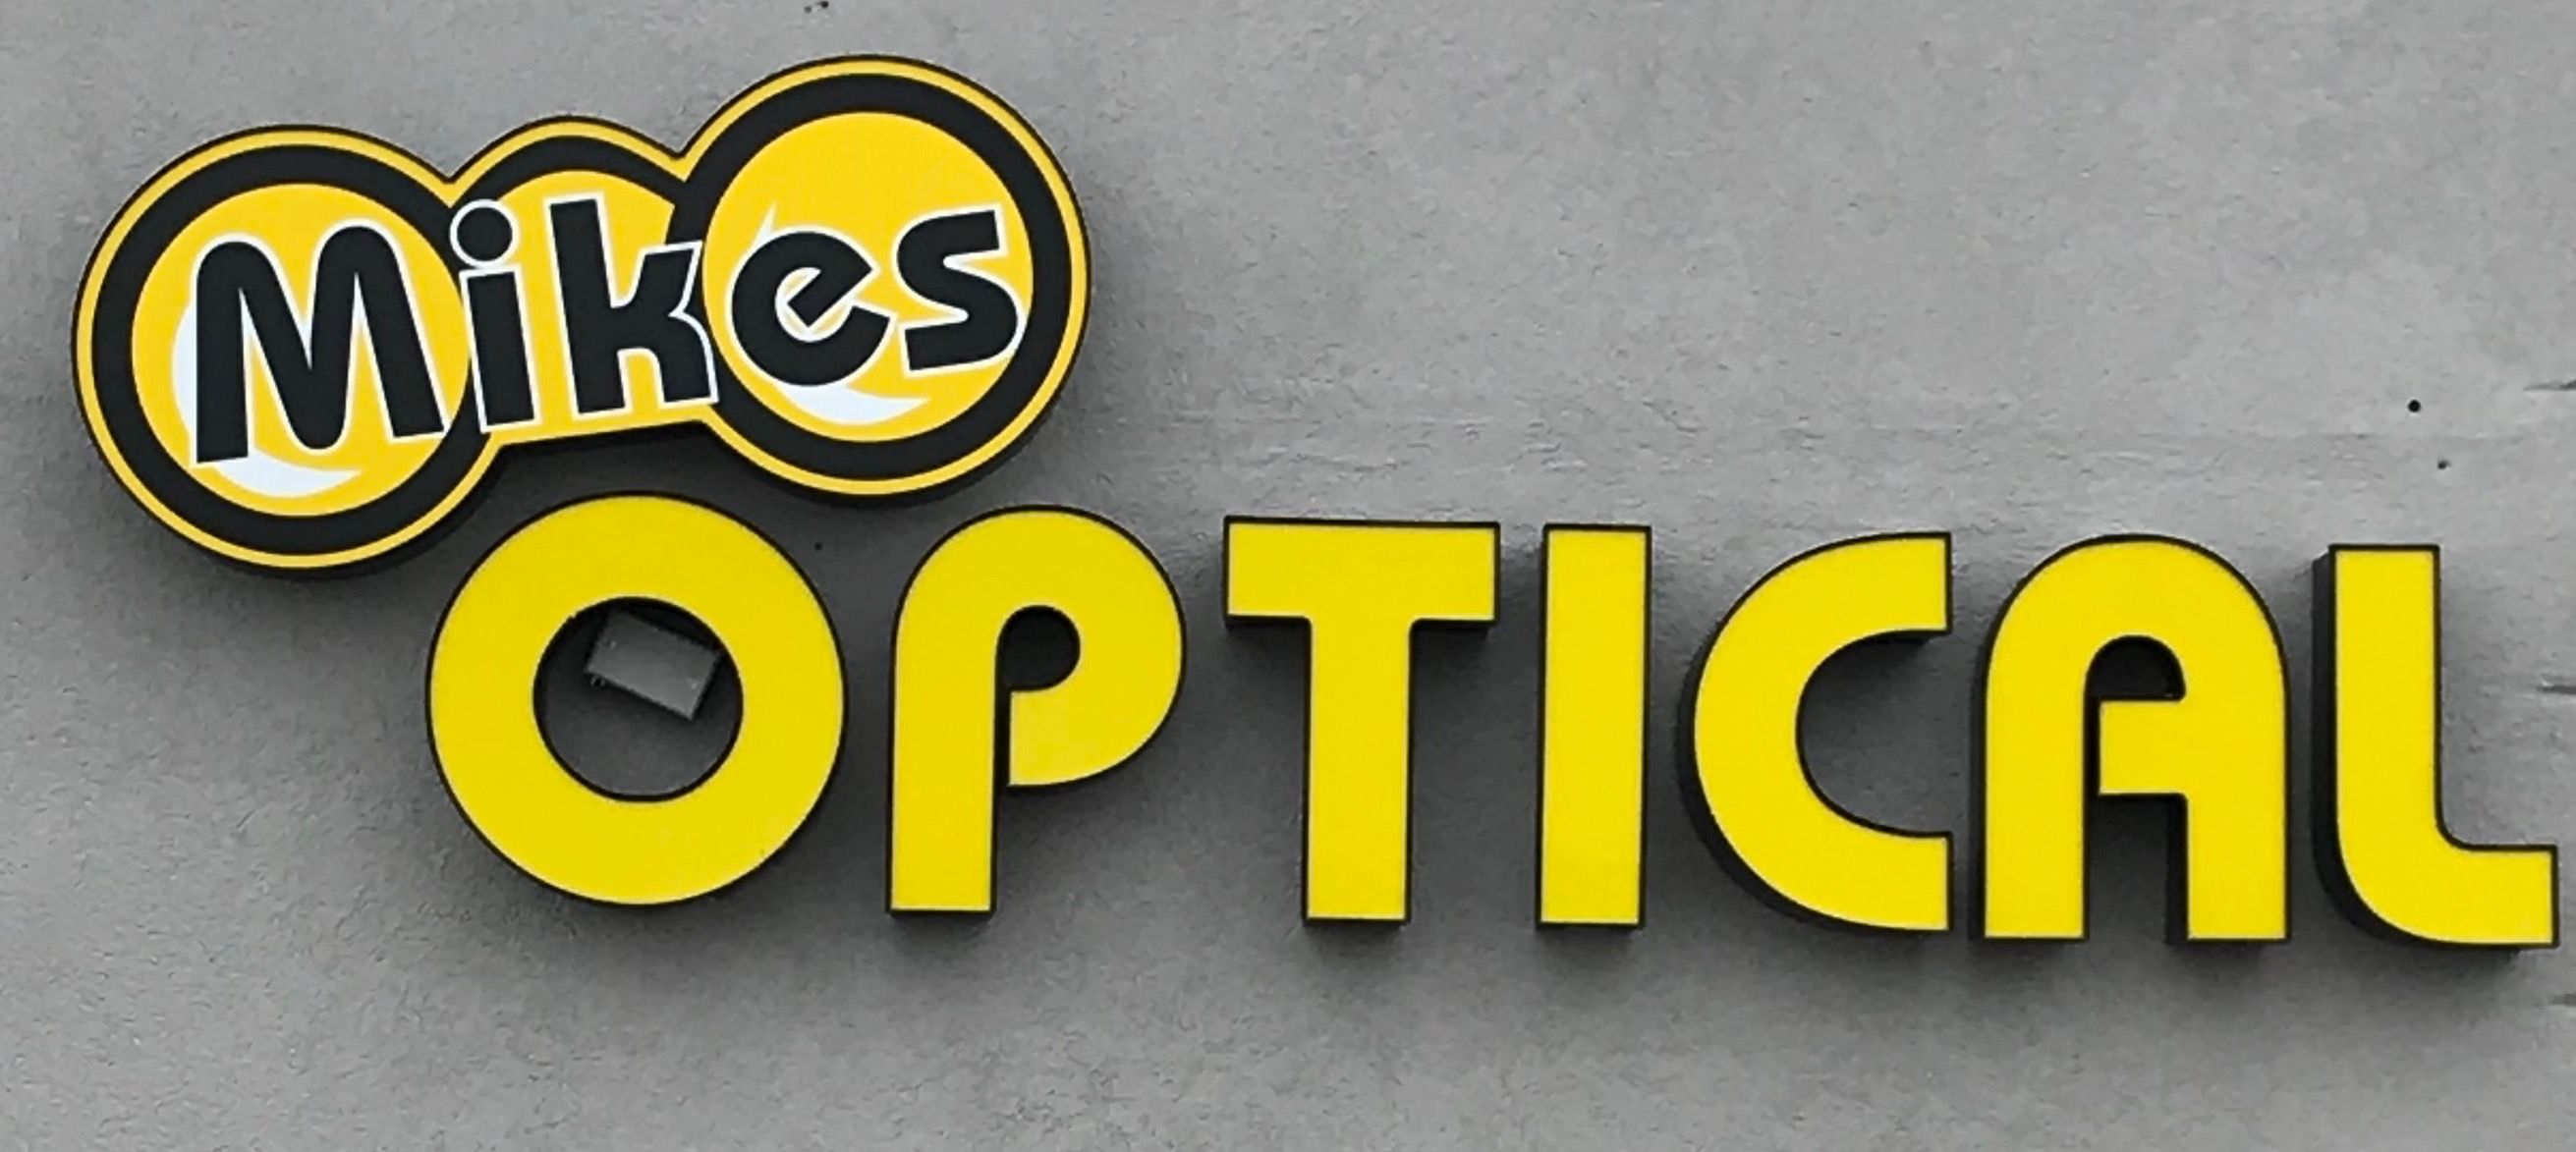 Mikes Optical